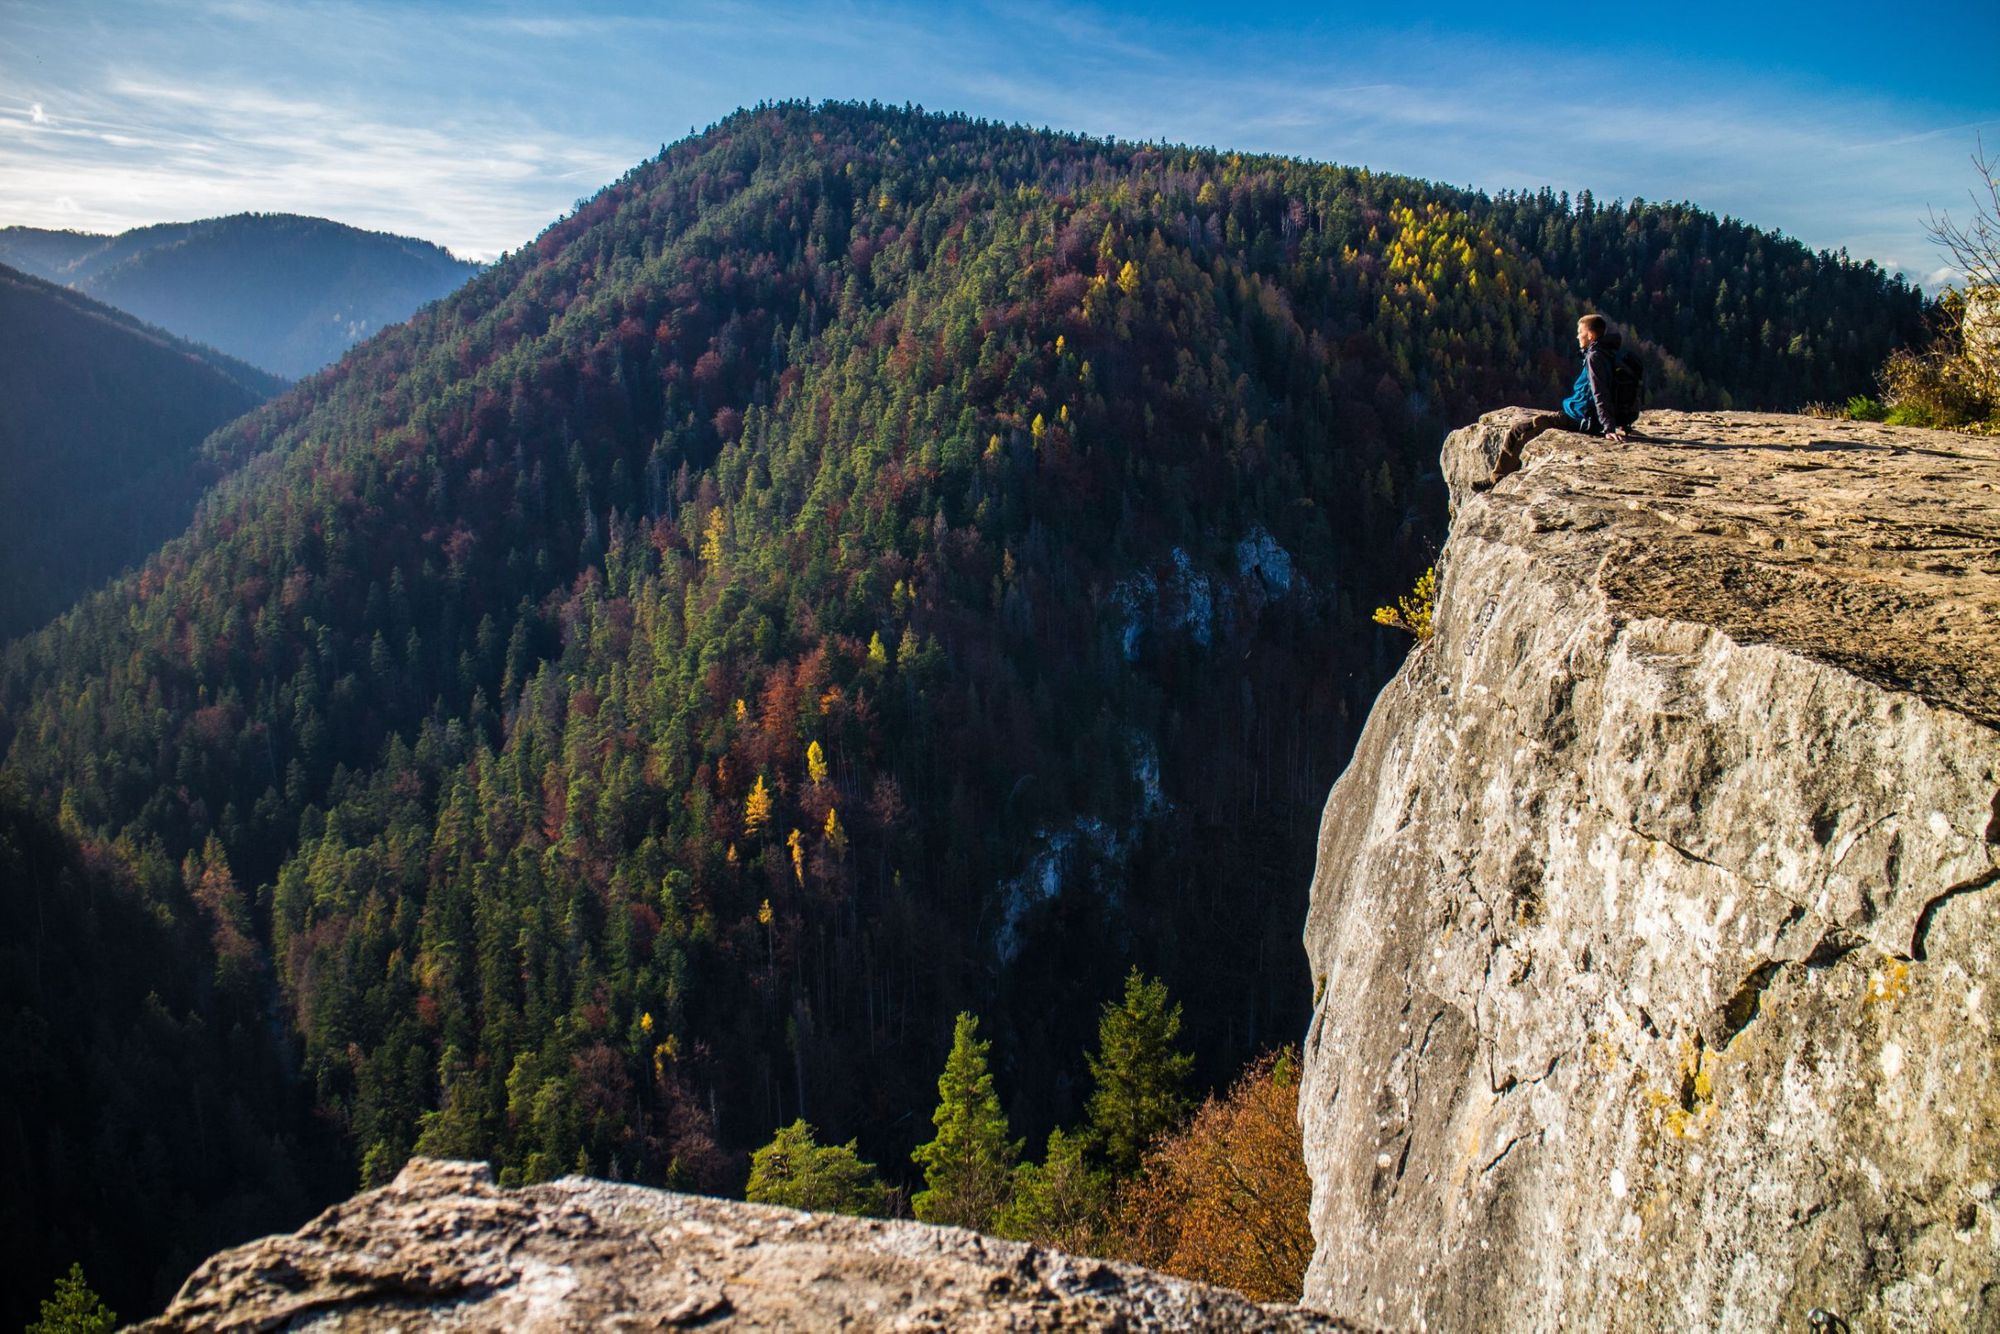 A viewpoint in Slovakia's Paradise National Park.